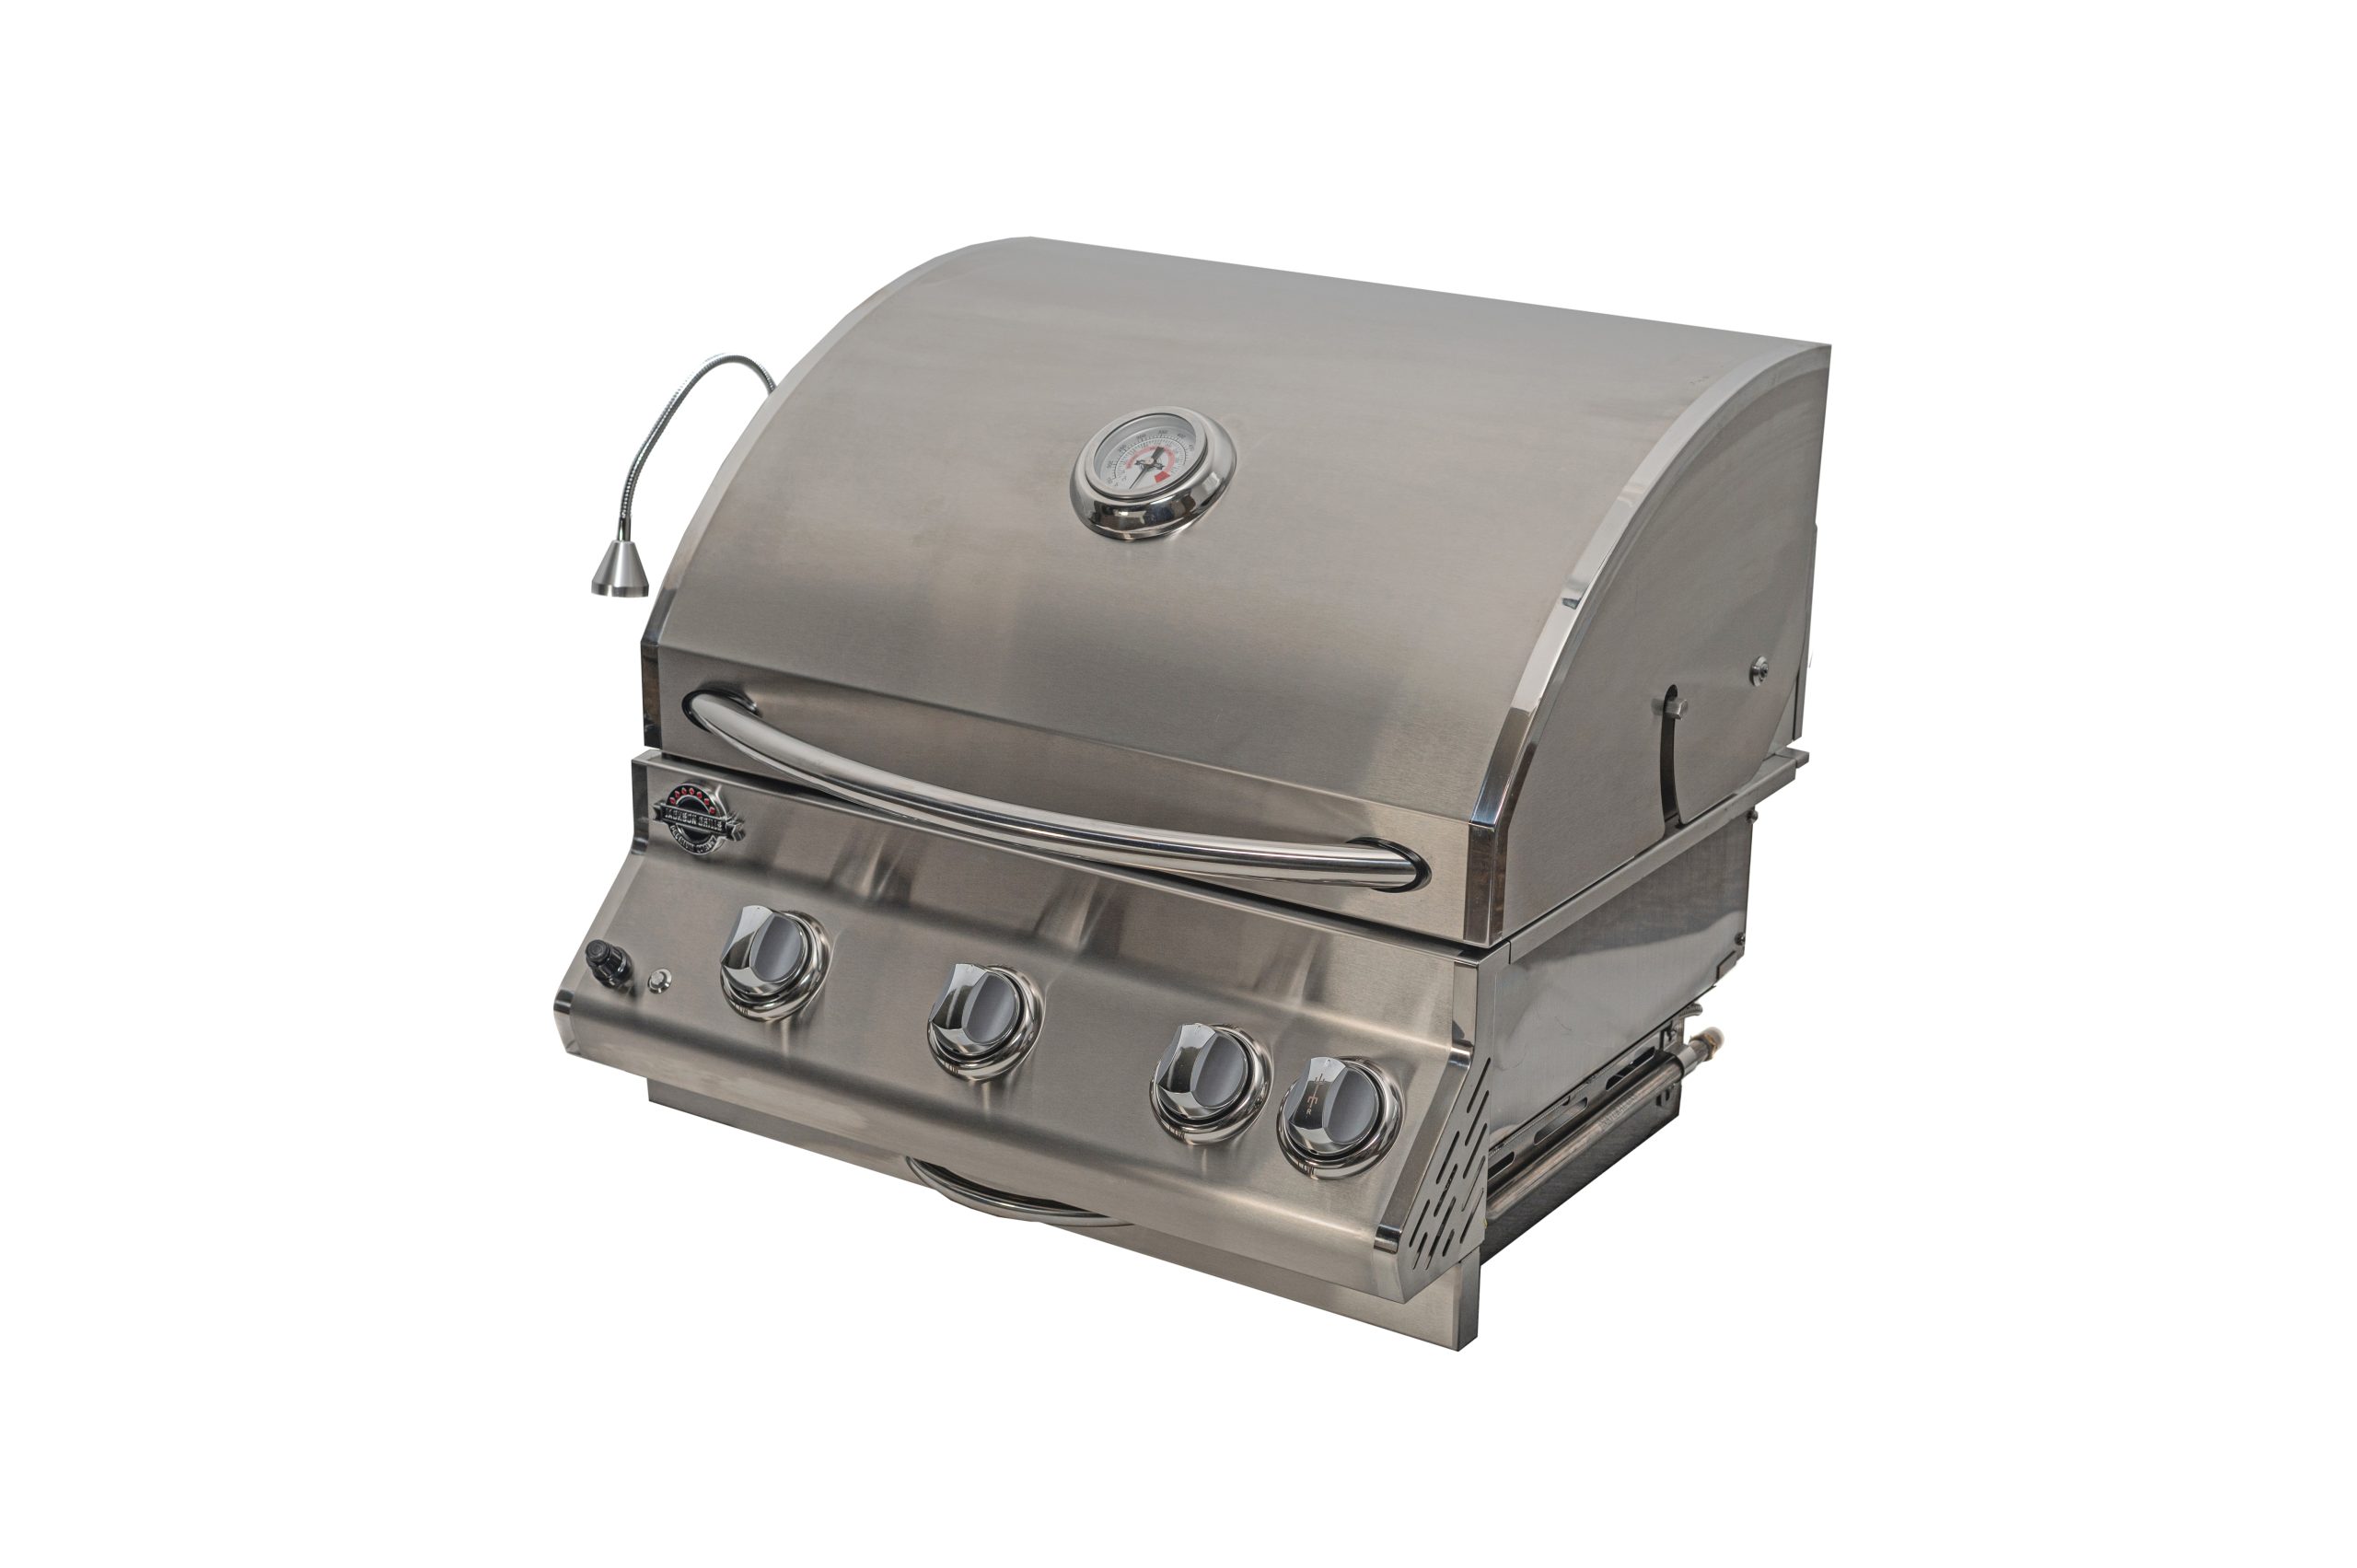 Jackson Grills - SUPREME 550 STAINLESS STEEL GAS GRILL